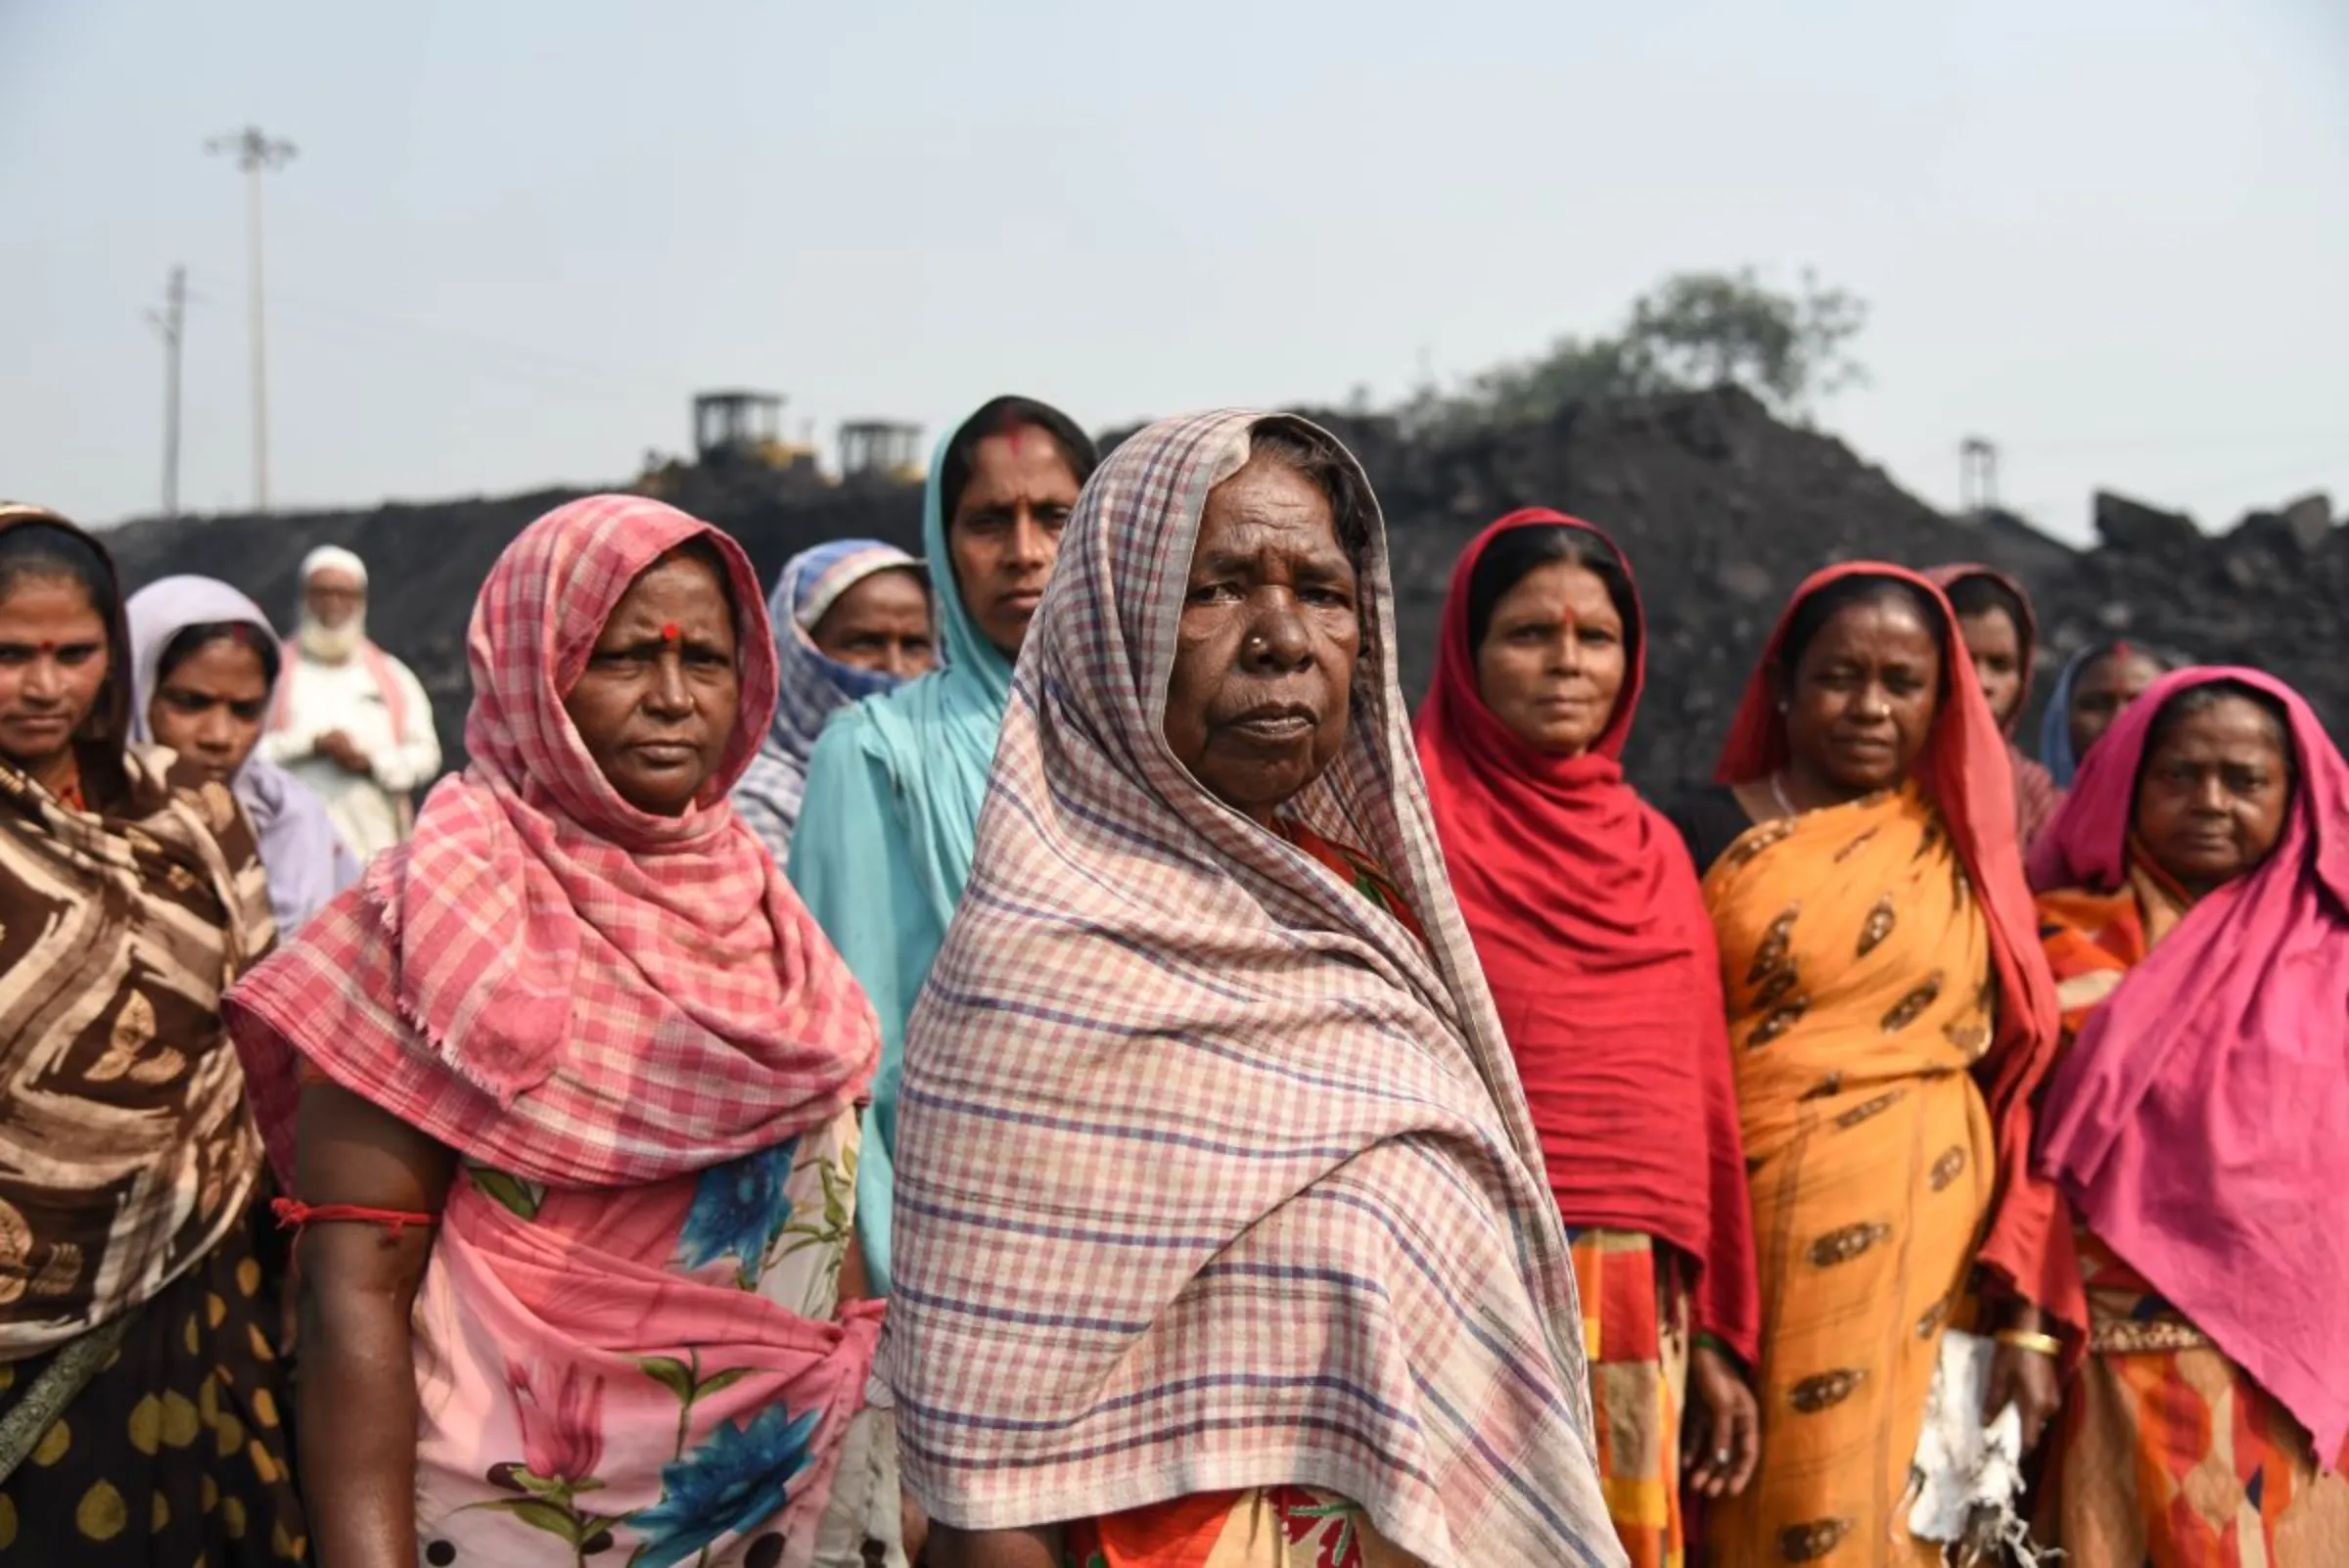 Women coal loaders pose for a picture in Jharia coalfield, India, November 10, 2022. Thomson Reuters Foundation/Tanmoy Bhaduri